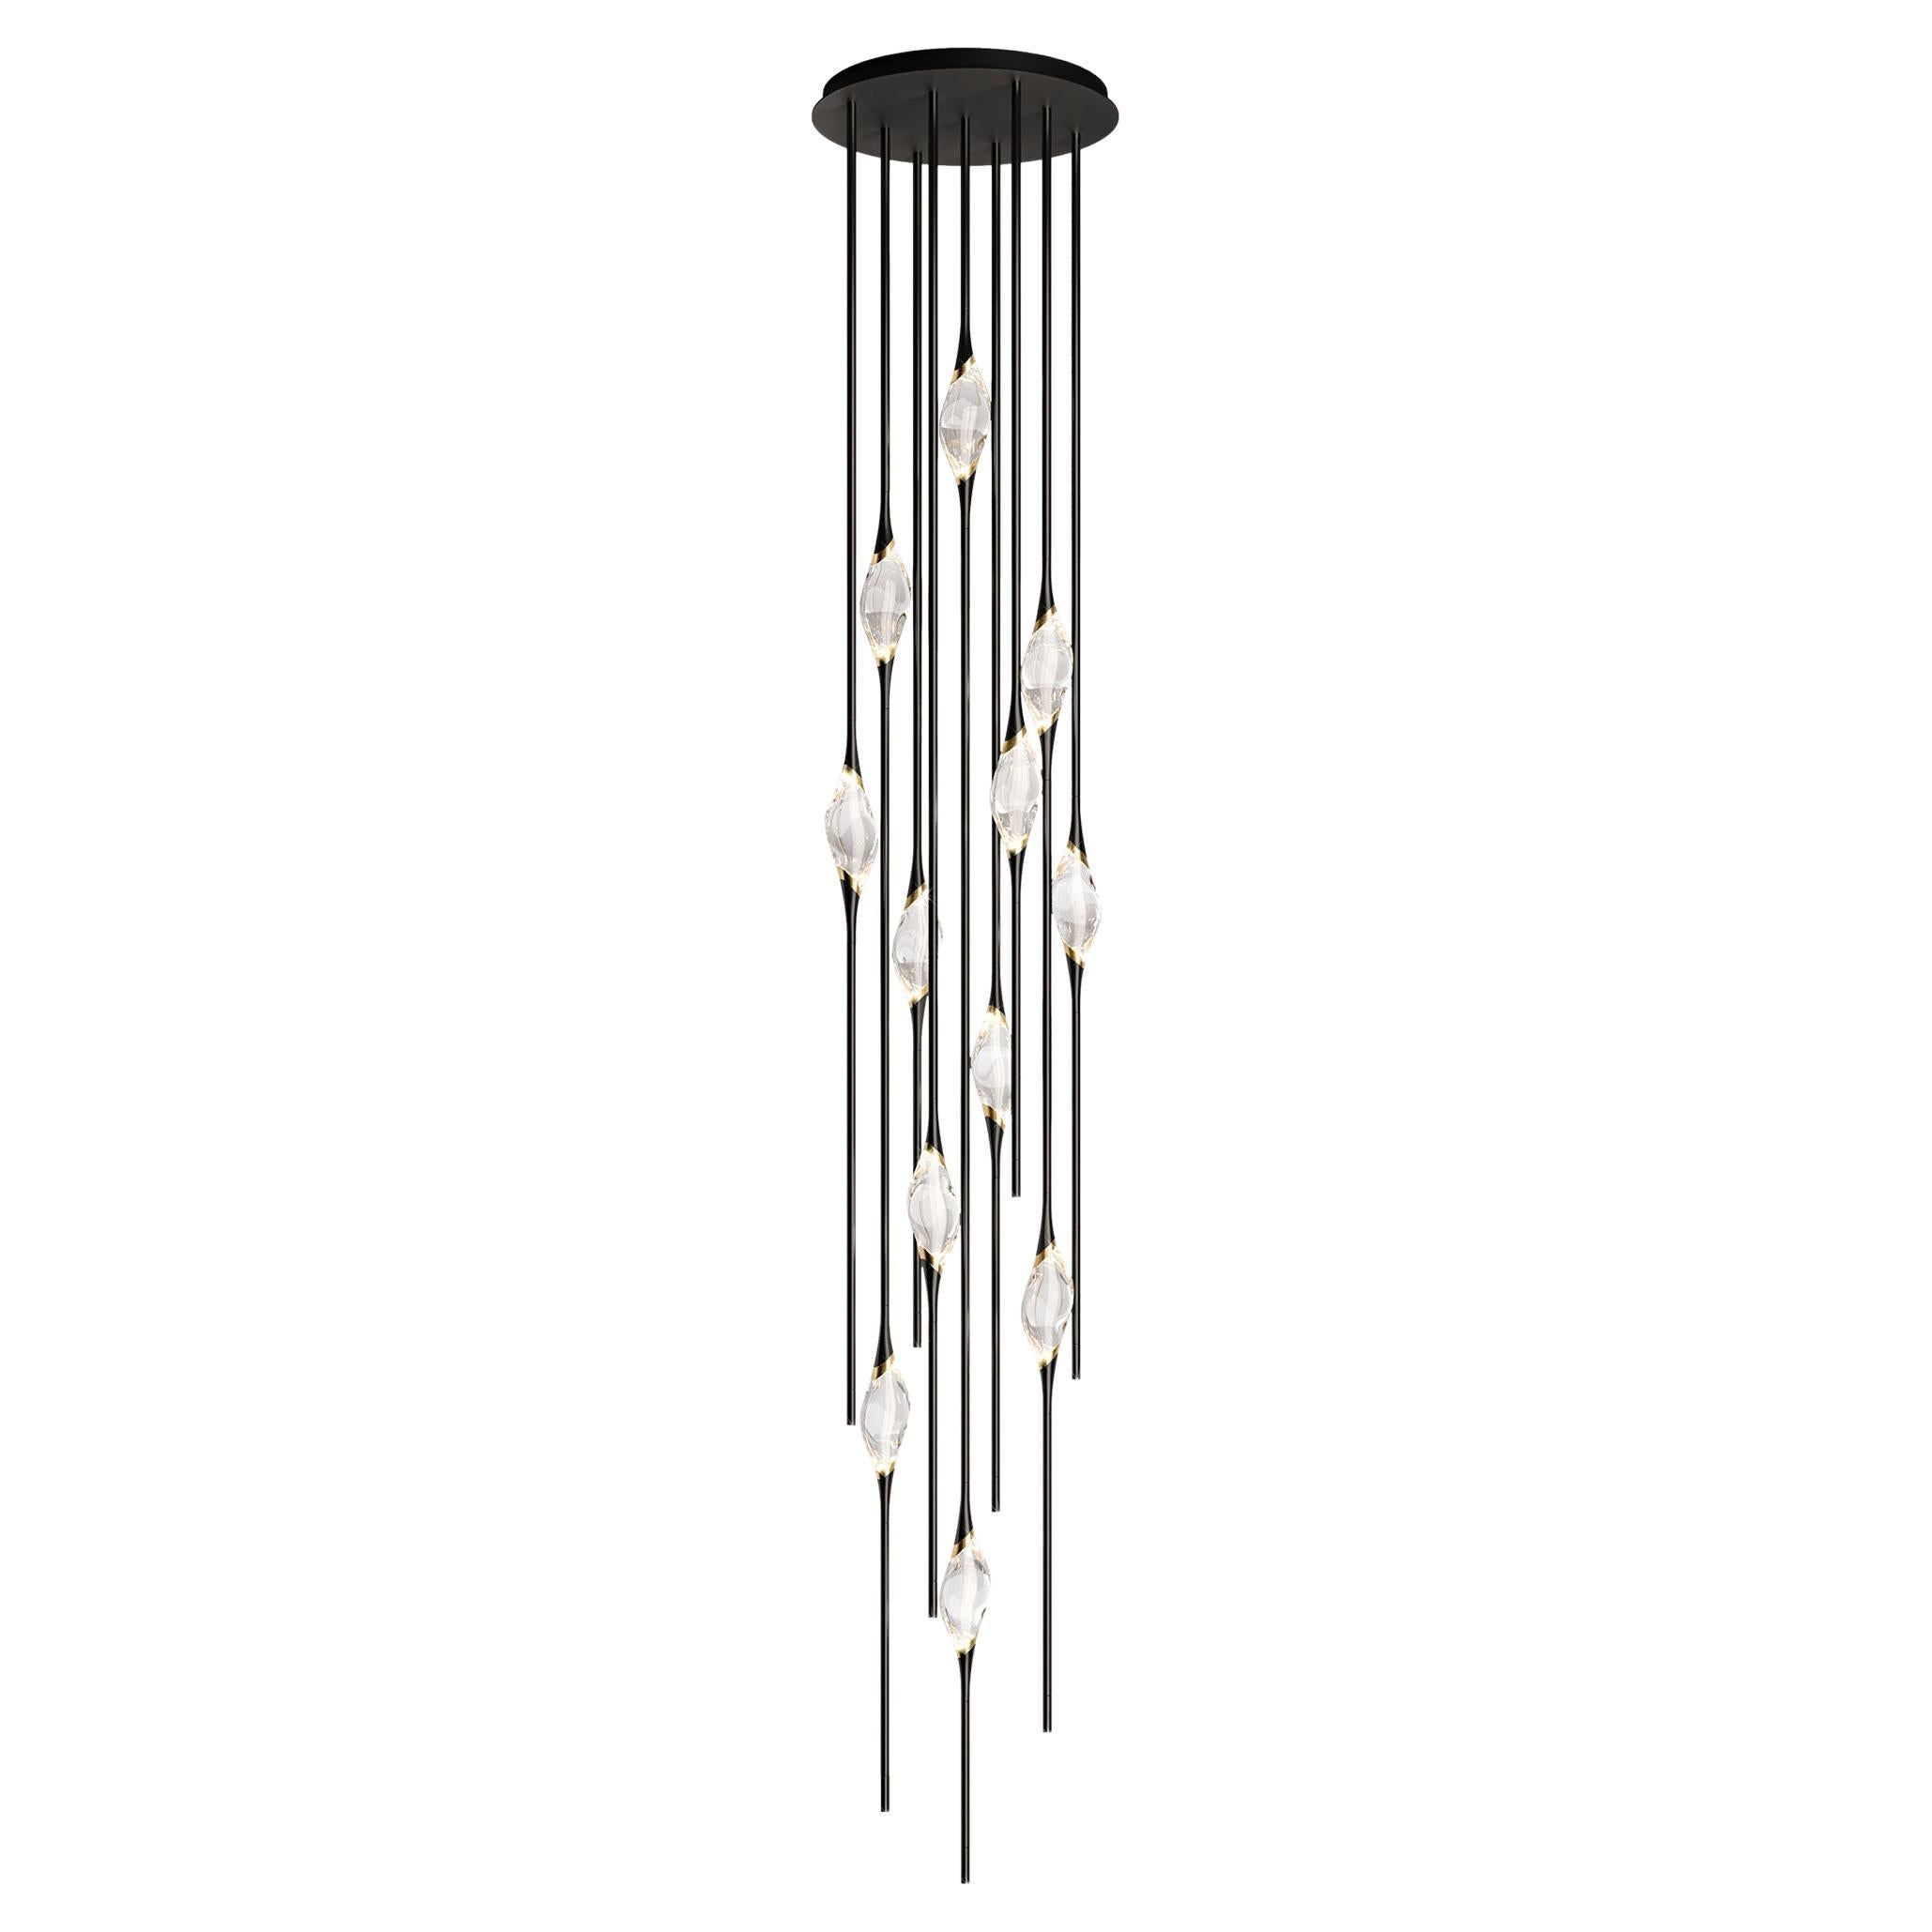 "Il Pezzo 12 Cluster Chandelier" - height 320cm/126" - black and polished brass